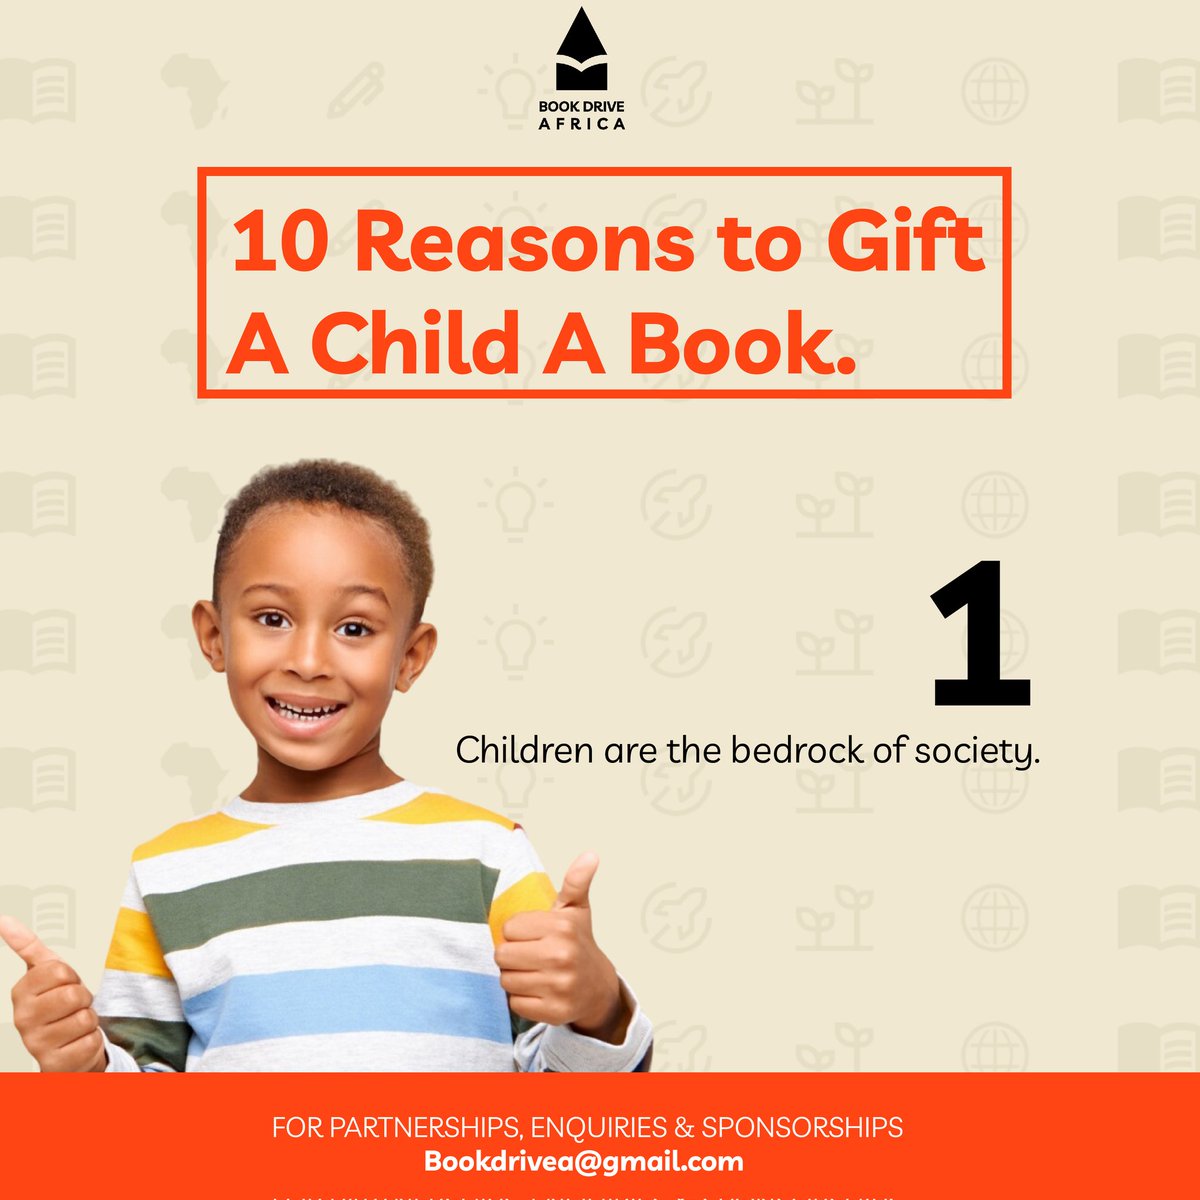 Partner with, and support us as we build the bedrock of the society. If you ever needed one, here's your reason to give to give to Book Drive Africa today!

#BooksForKids
#LiteracyMatters
#EducationForAll
#ReadingIsPower
#OAUTwitter 
#BookTwitter